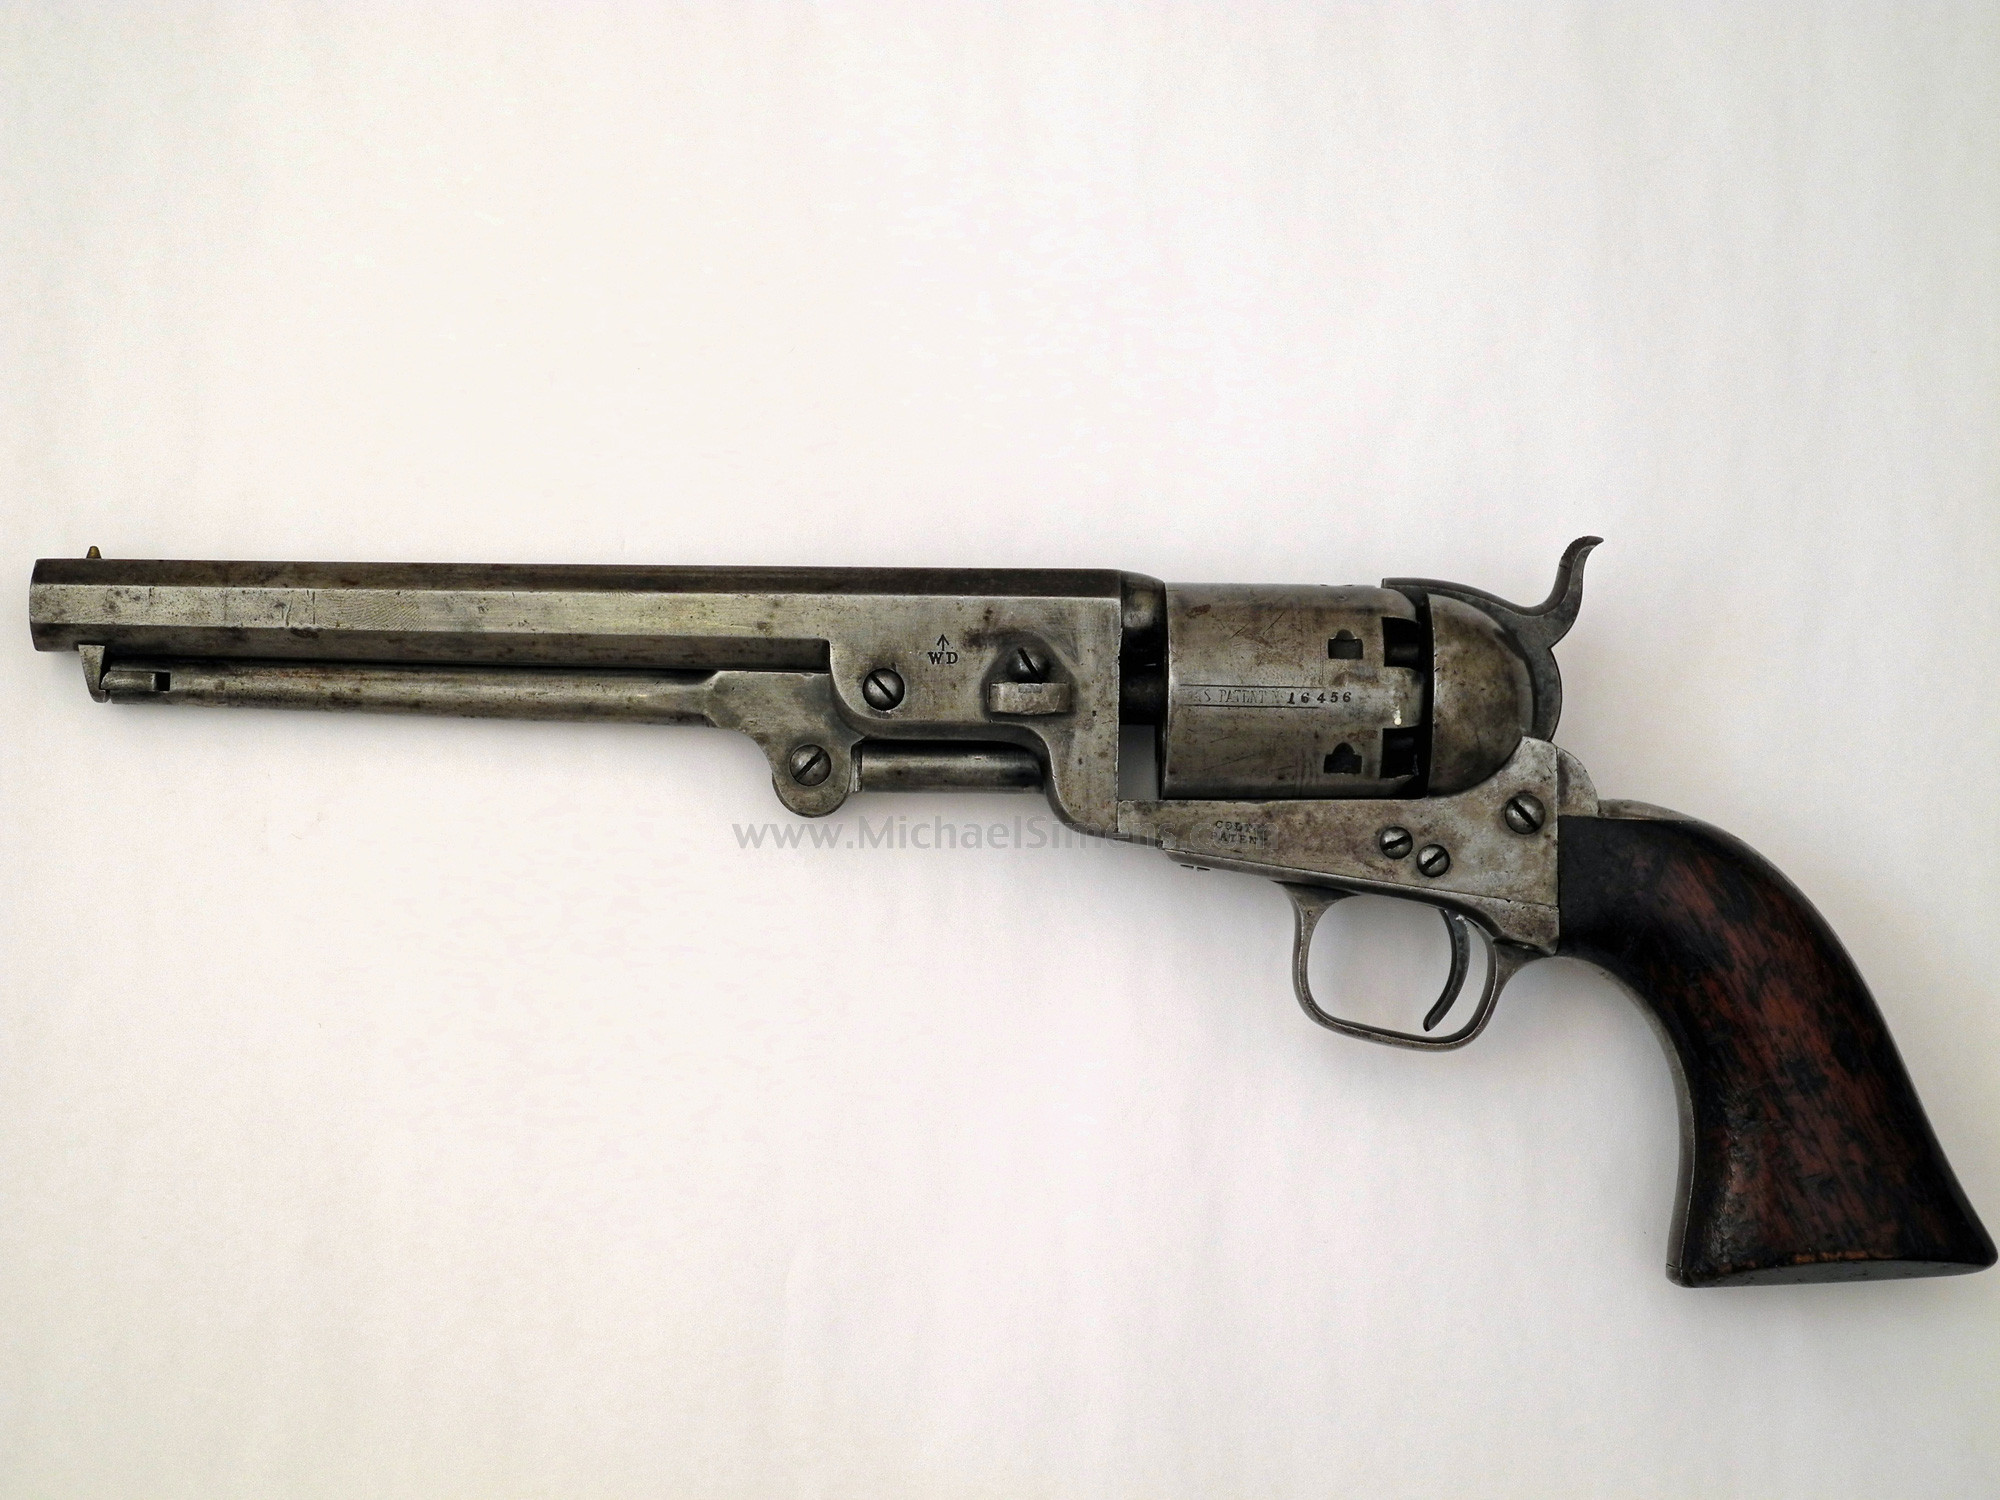 COLT LONDON NAVY WITH WD BROAD ARROW MARKS